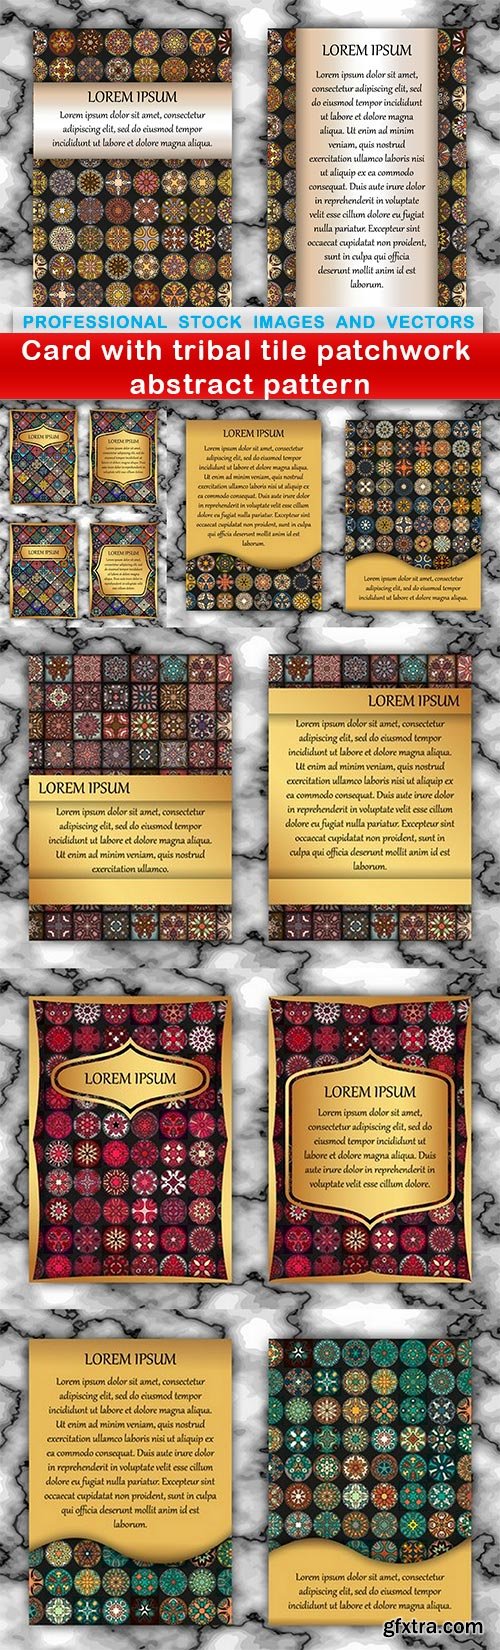 Card with tribal tile patchwork abstract pattern - 7 EPS